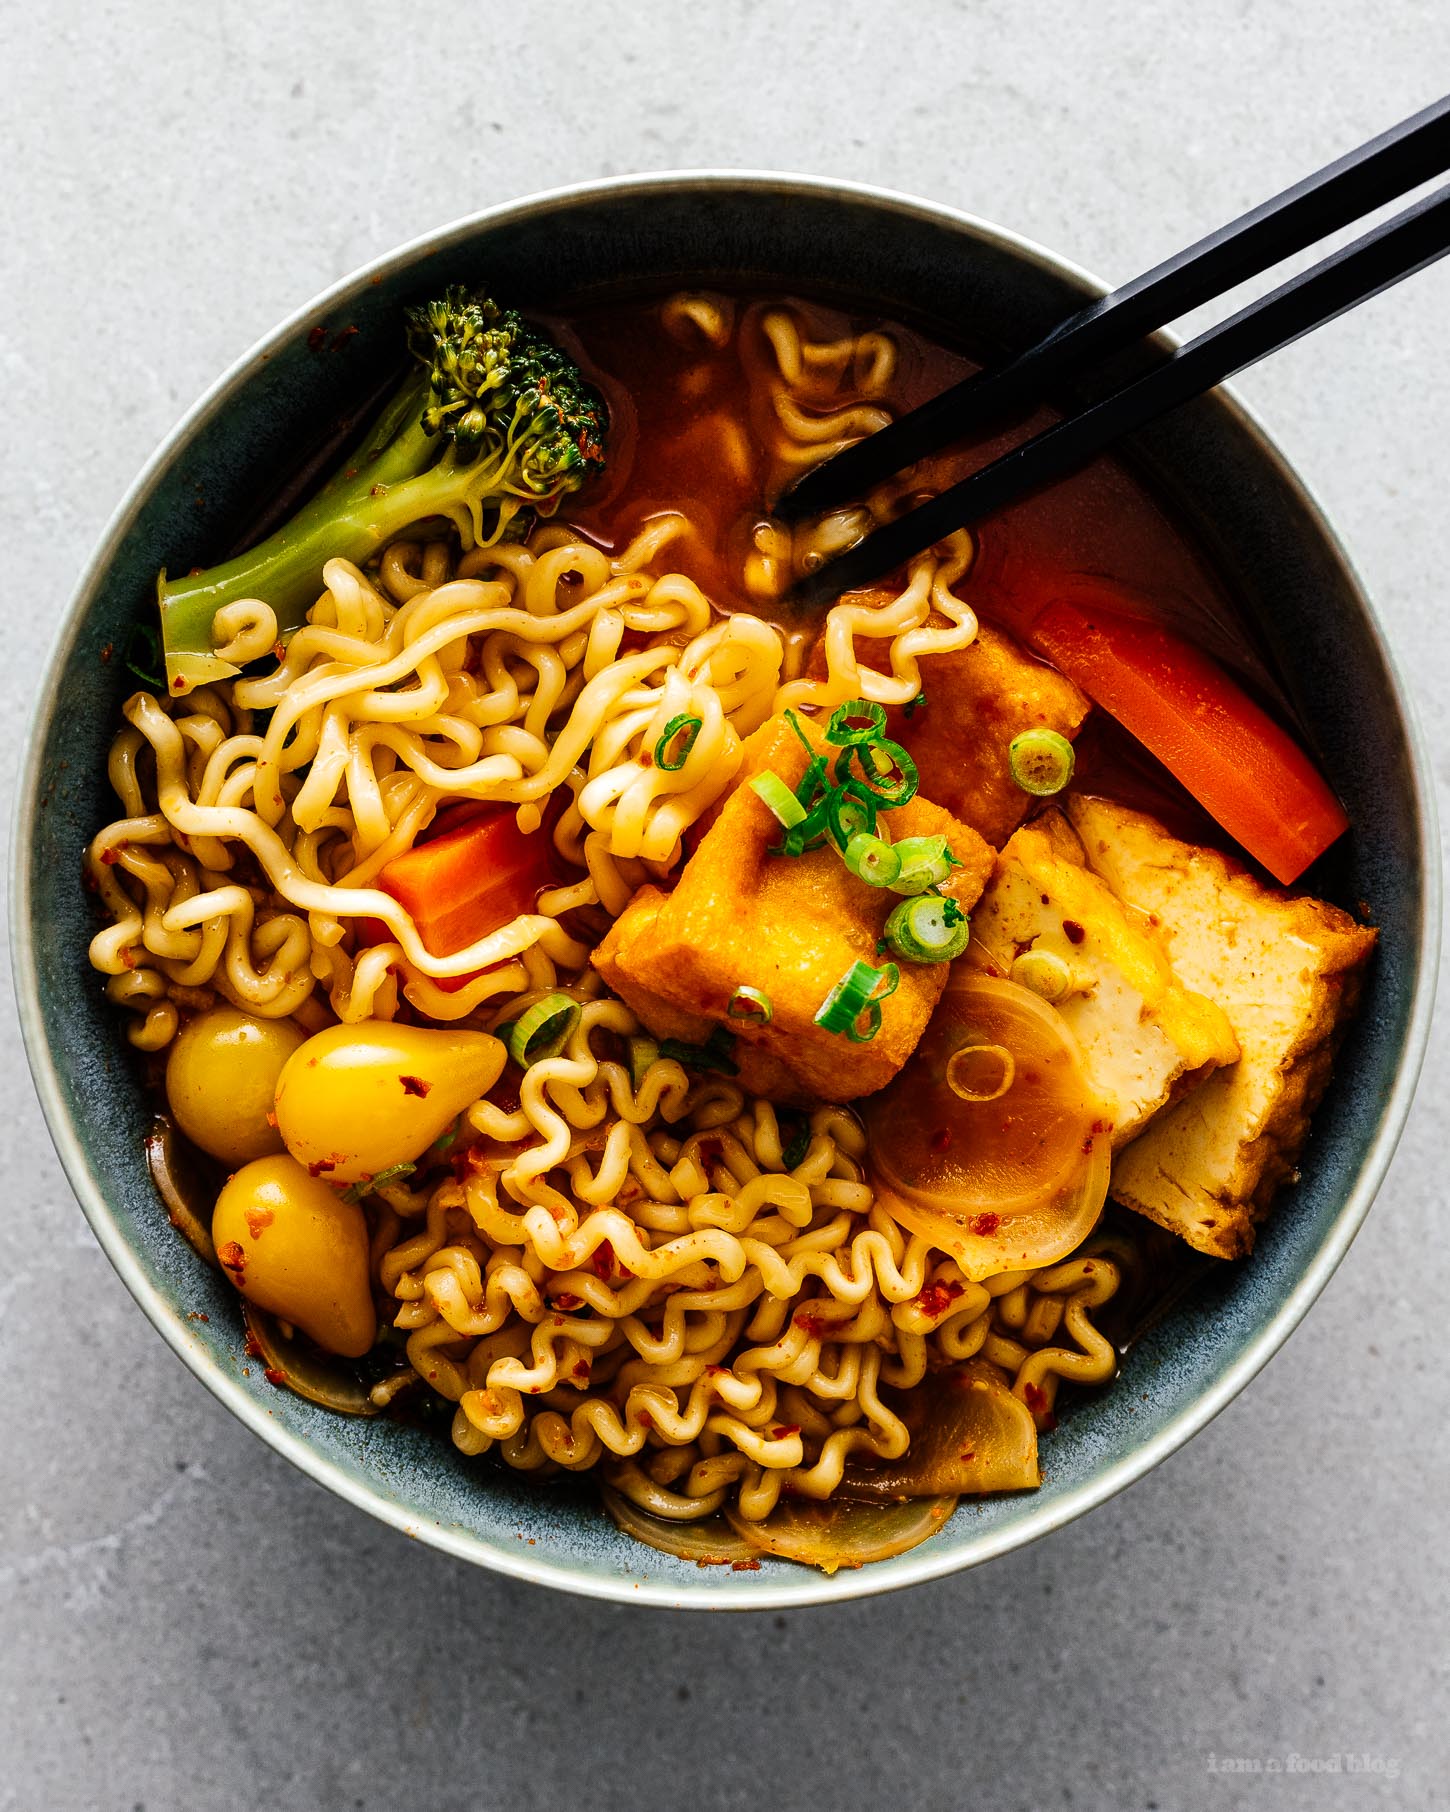 Spicy Korean Ramen Recipe with Tofu and Vegetables | www.iamafoodblog.com